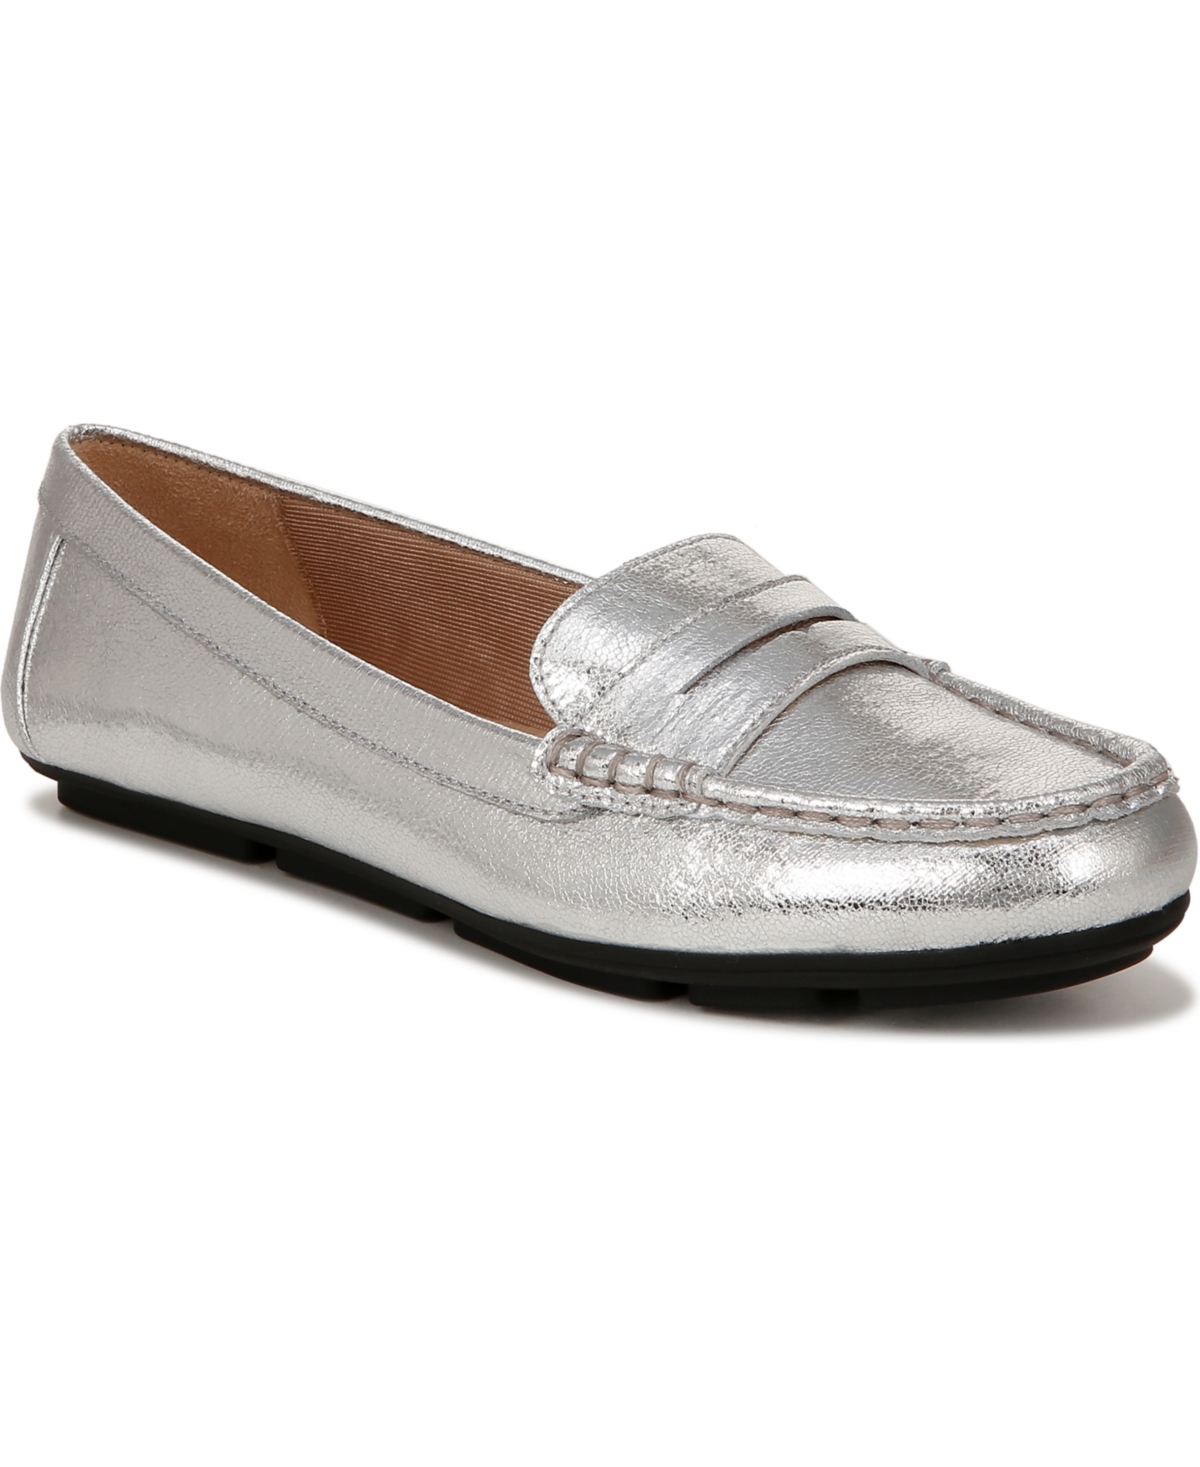 Lifestride Riviera Slip-on Loafers In Metallic Silver Faux Leather